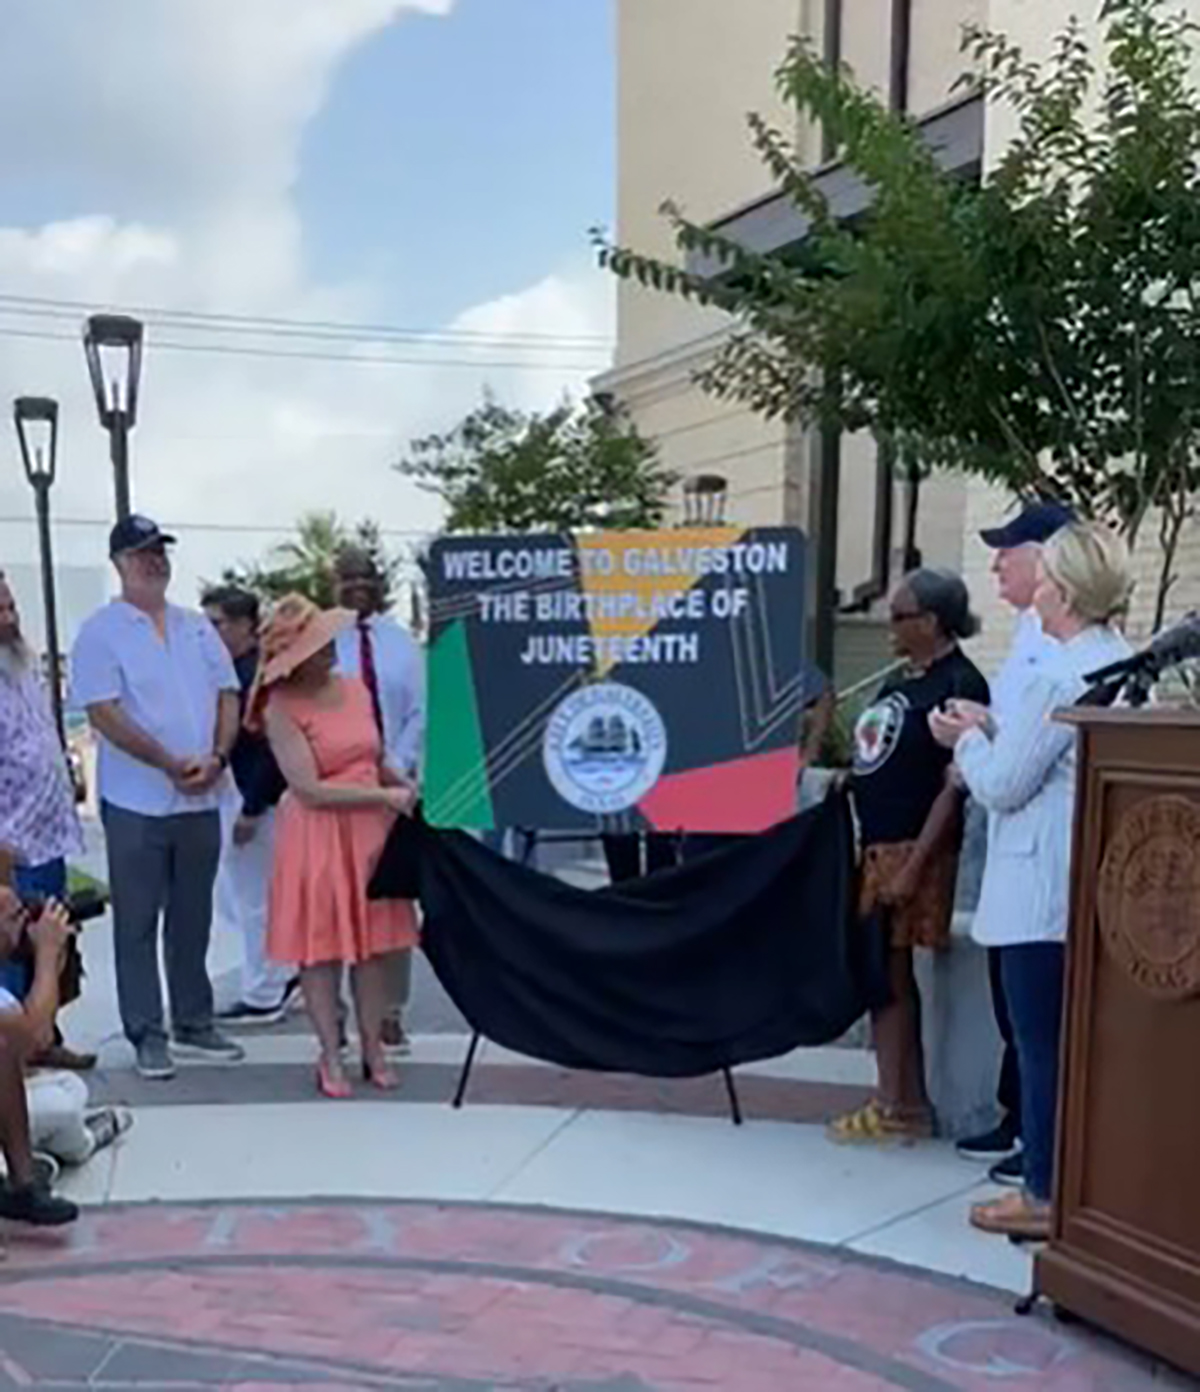 PHOTO: The City of Galveston unveiled a new welcome sign June 16, 2023 that will greet visitors to the island reading "Welcome to Galveston – Birthplace of Juneteenth."